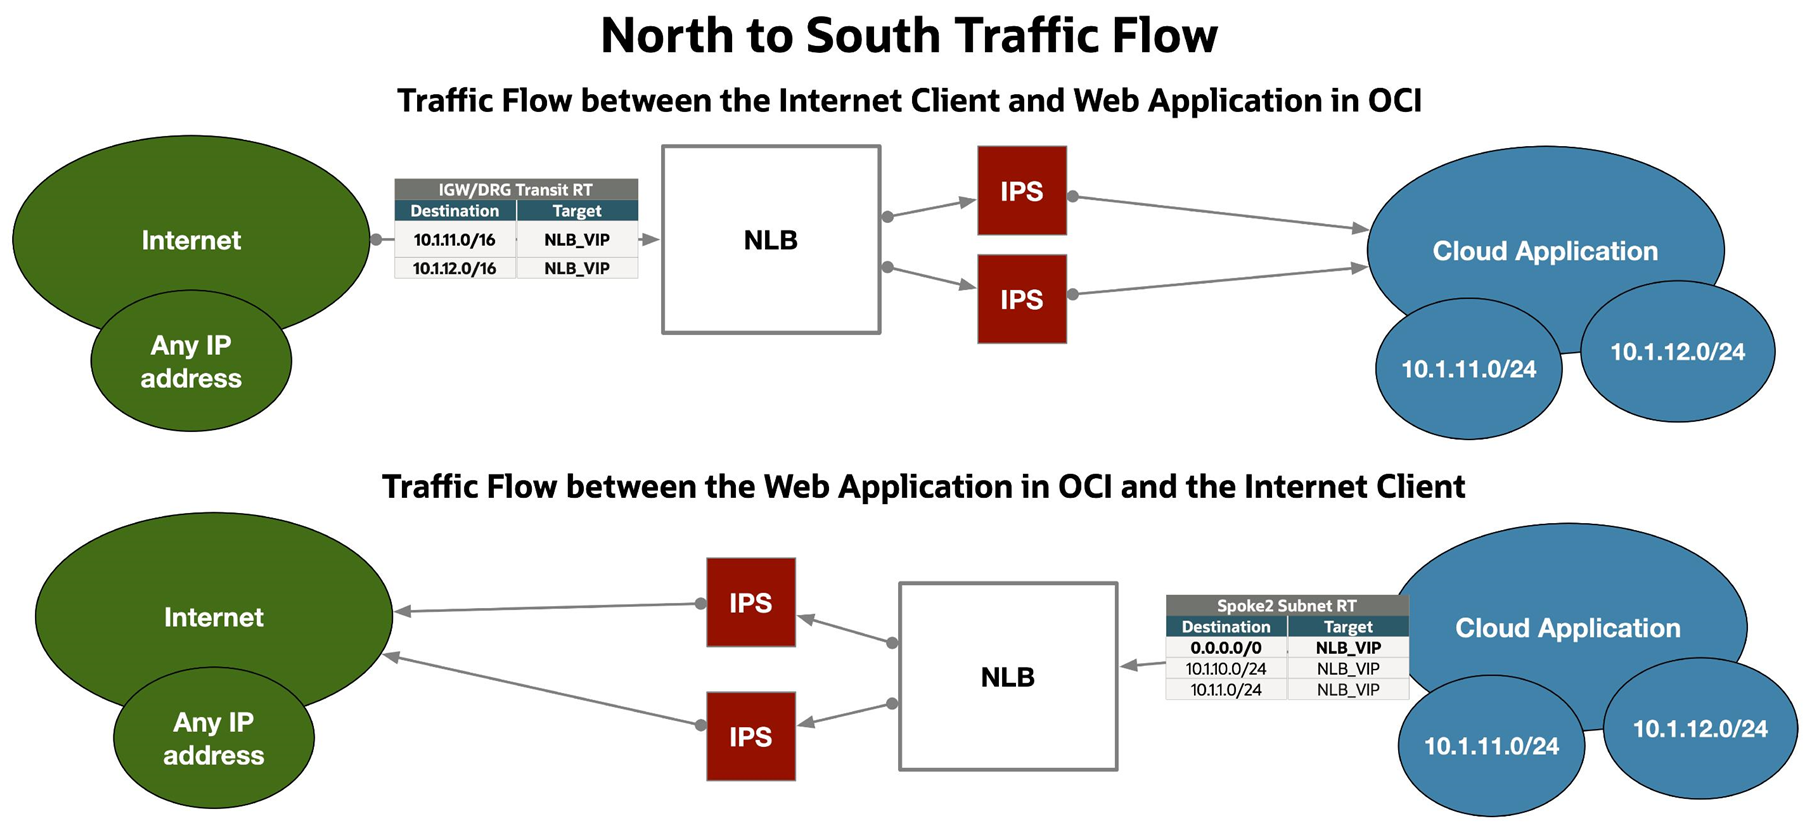 North to South Traffic Flow